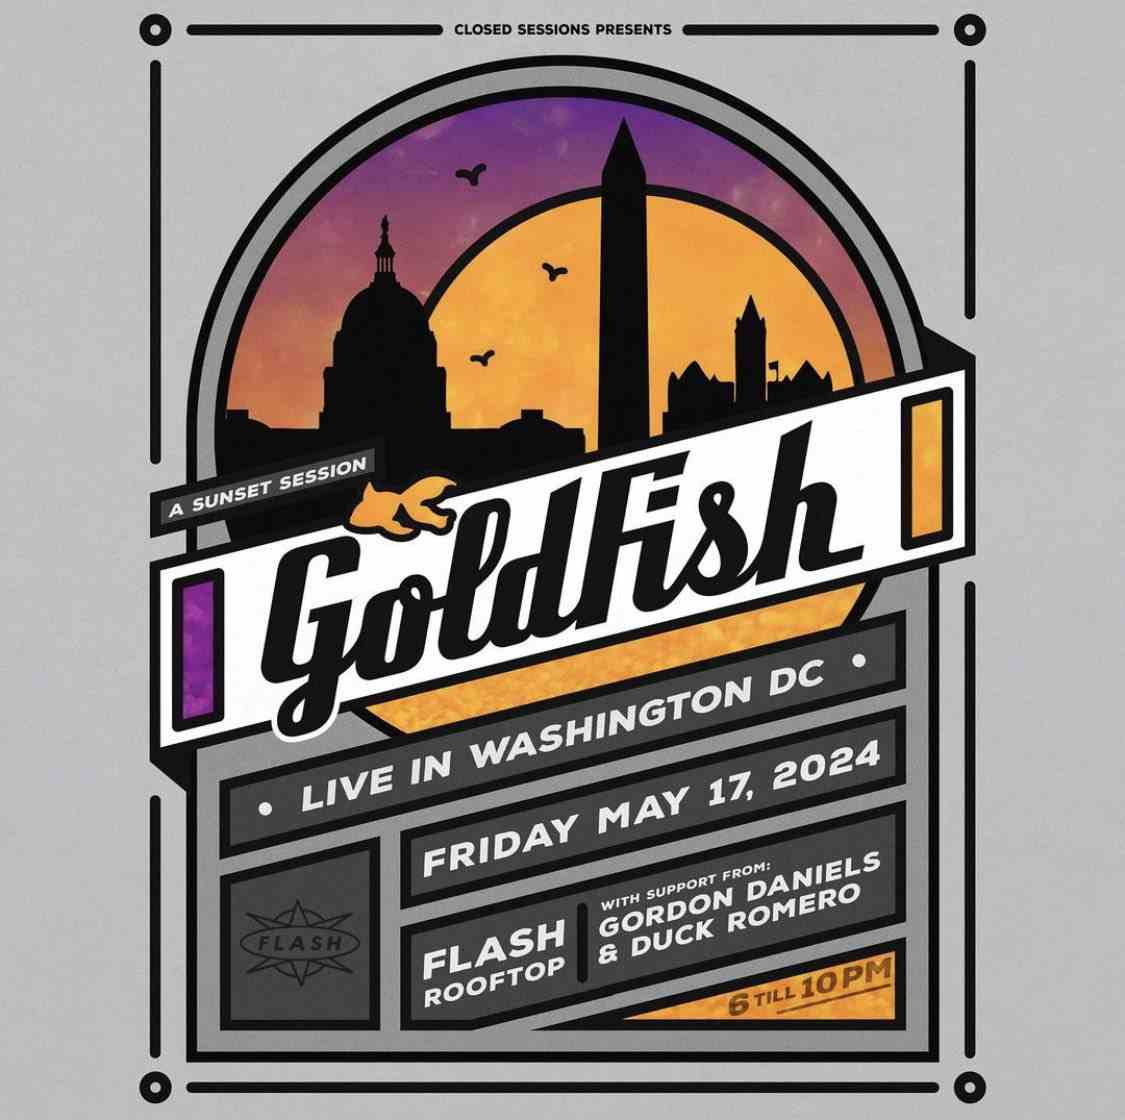 A Sunset Session with Goldfish @ Flash Rooftop from 6-10pm event flyer